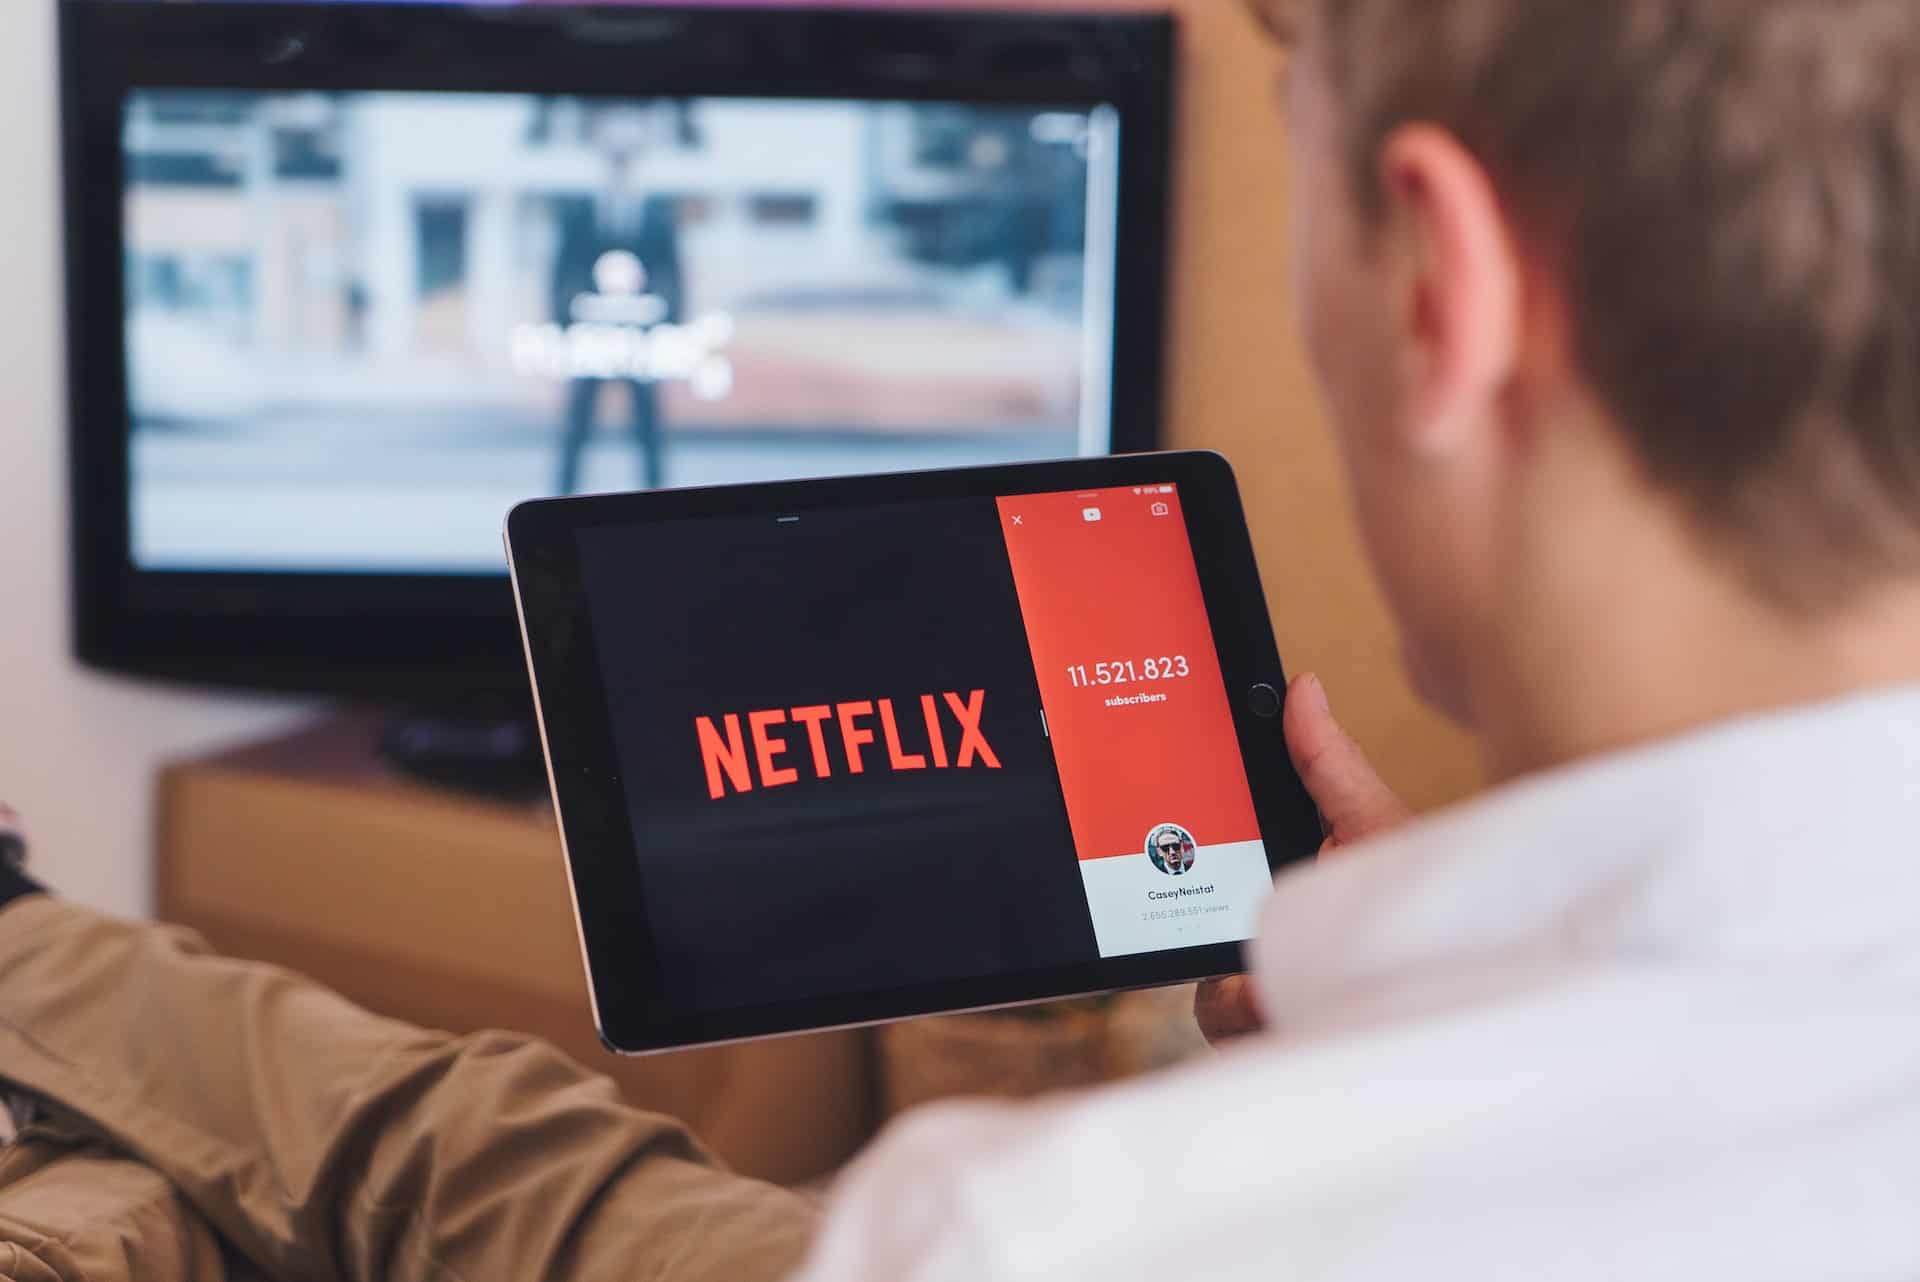 Netflix is changing its advertising policy – changes coming in November!